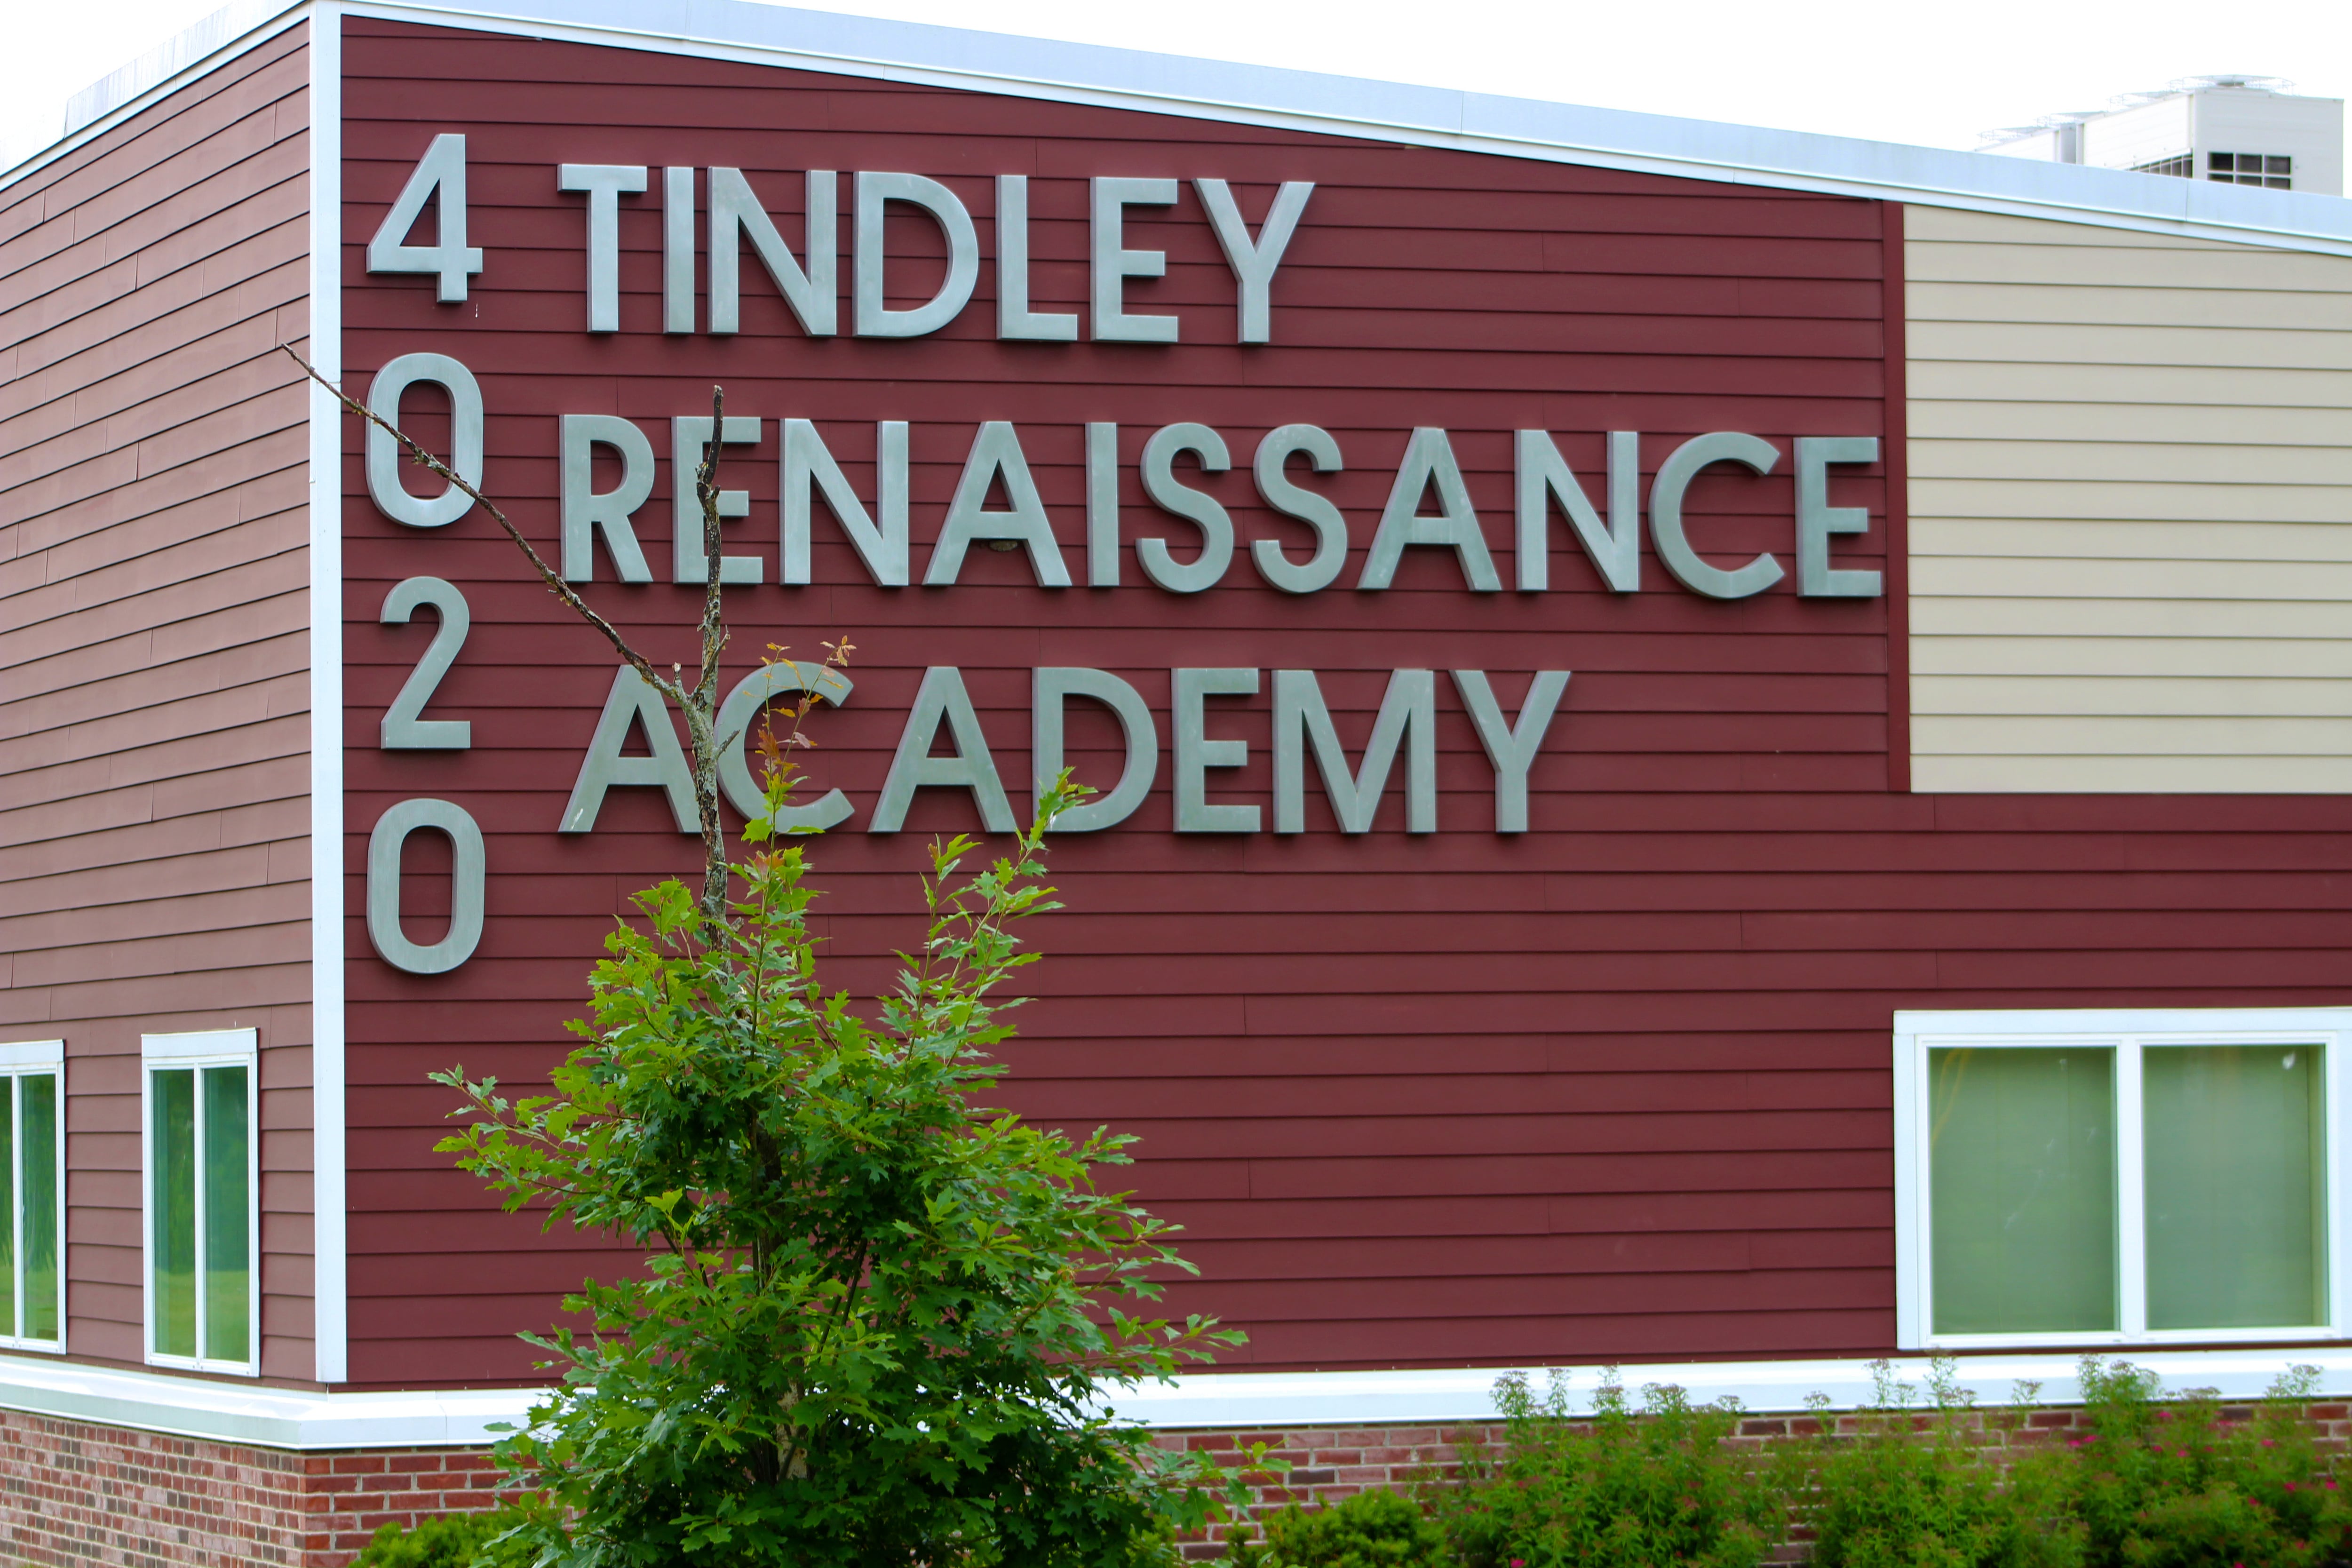 One corner of a red and white school building with the address and name of the school in large white letters.